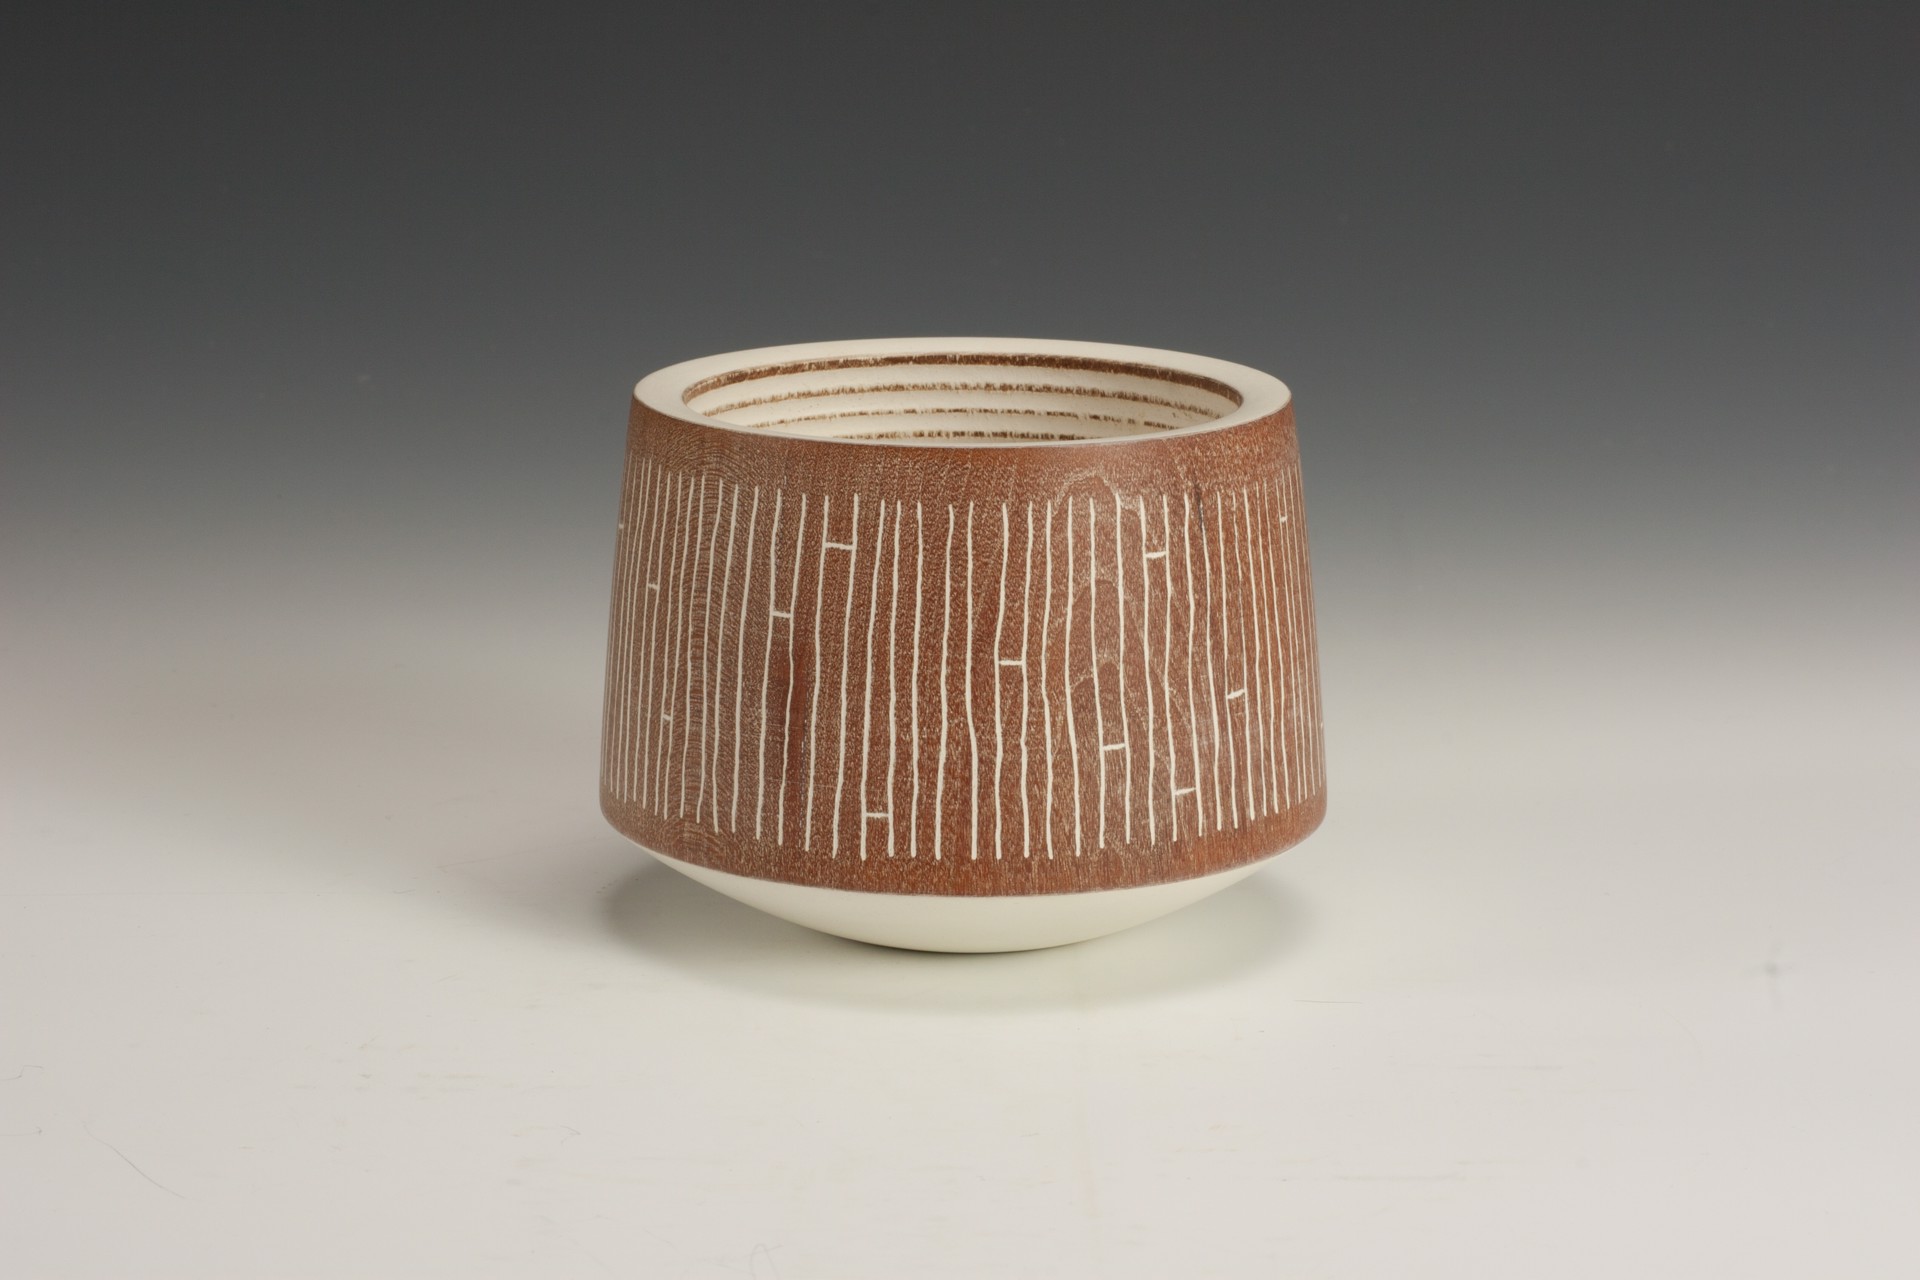 Cherry bowl with bamboo pattern - 21028 by Mark Gardner